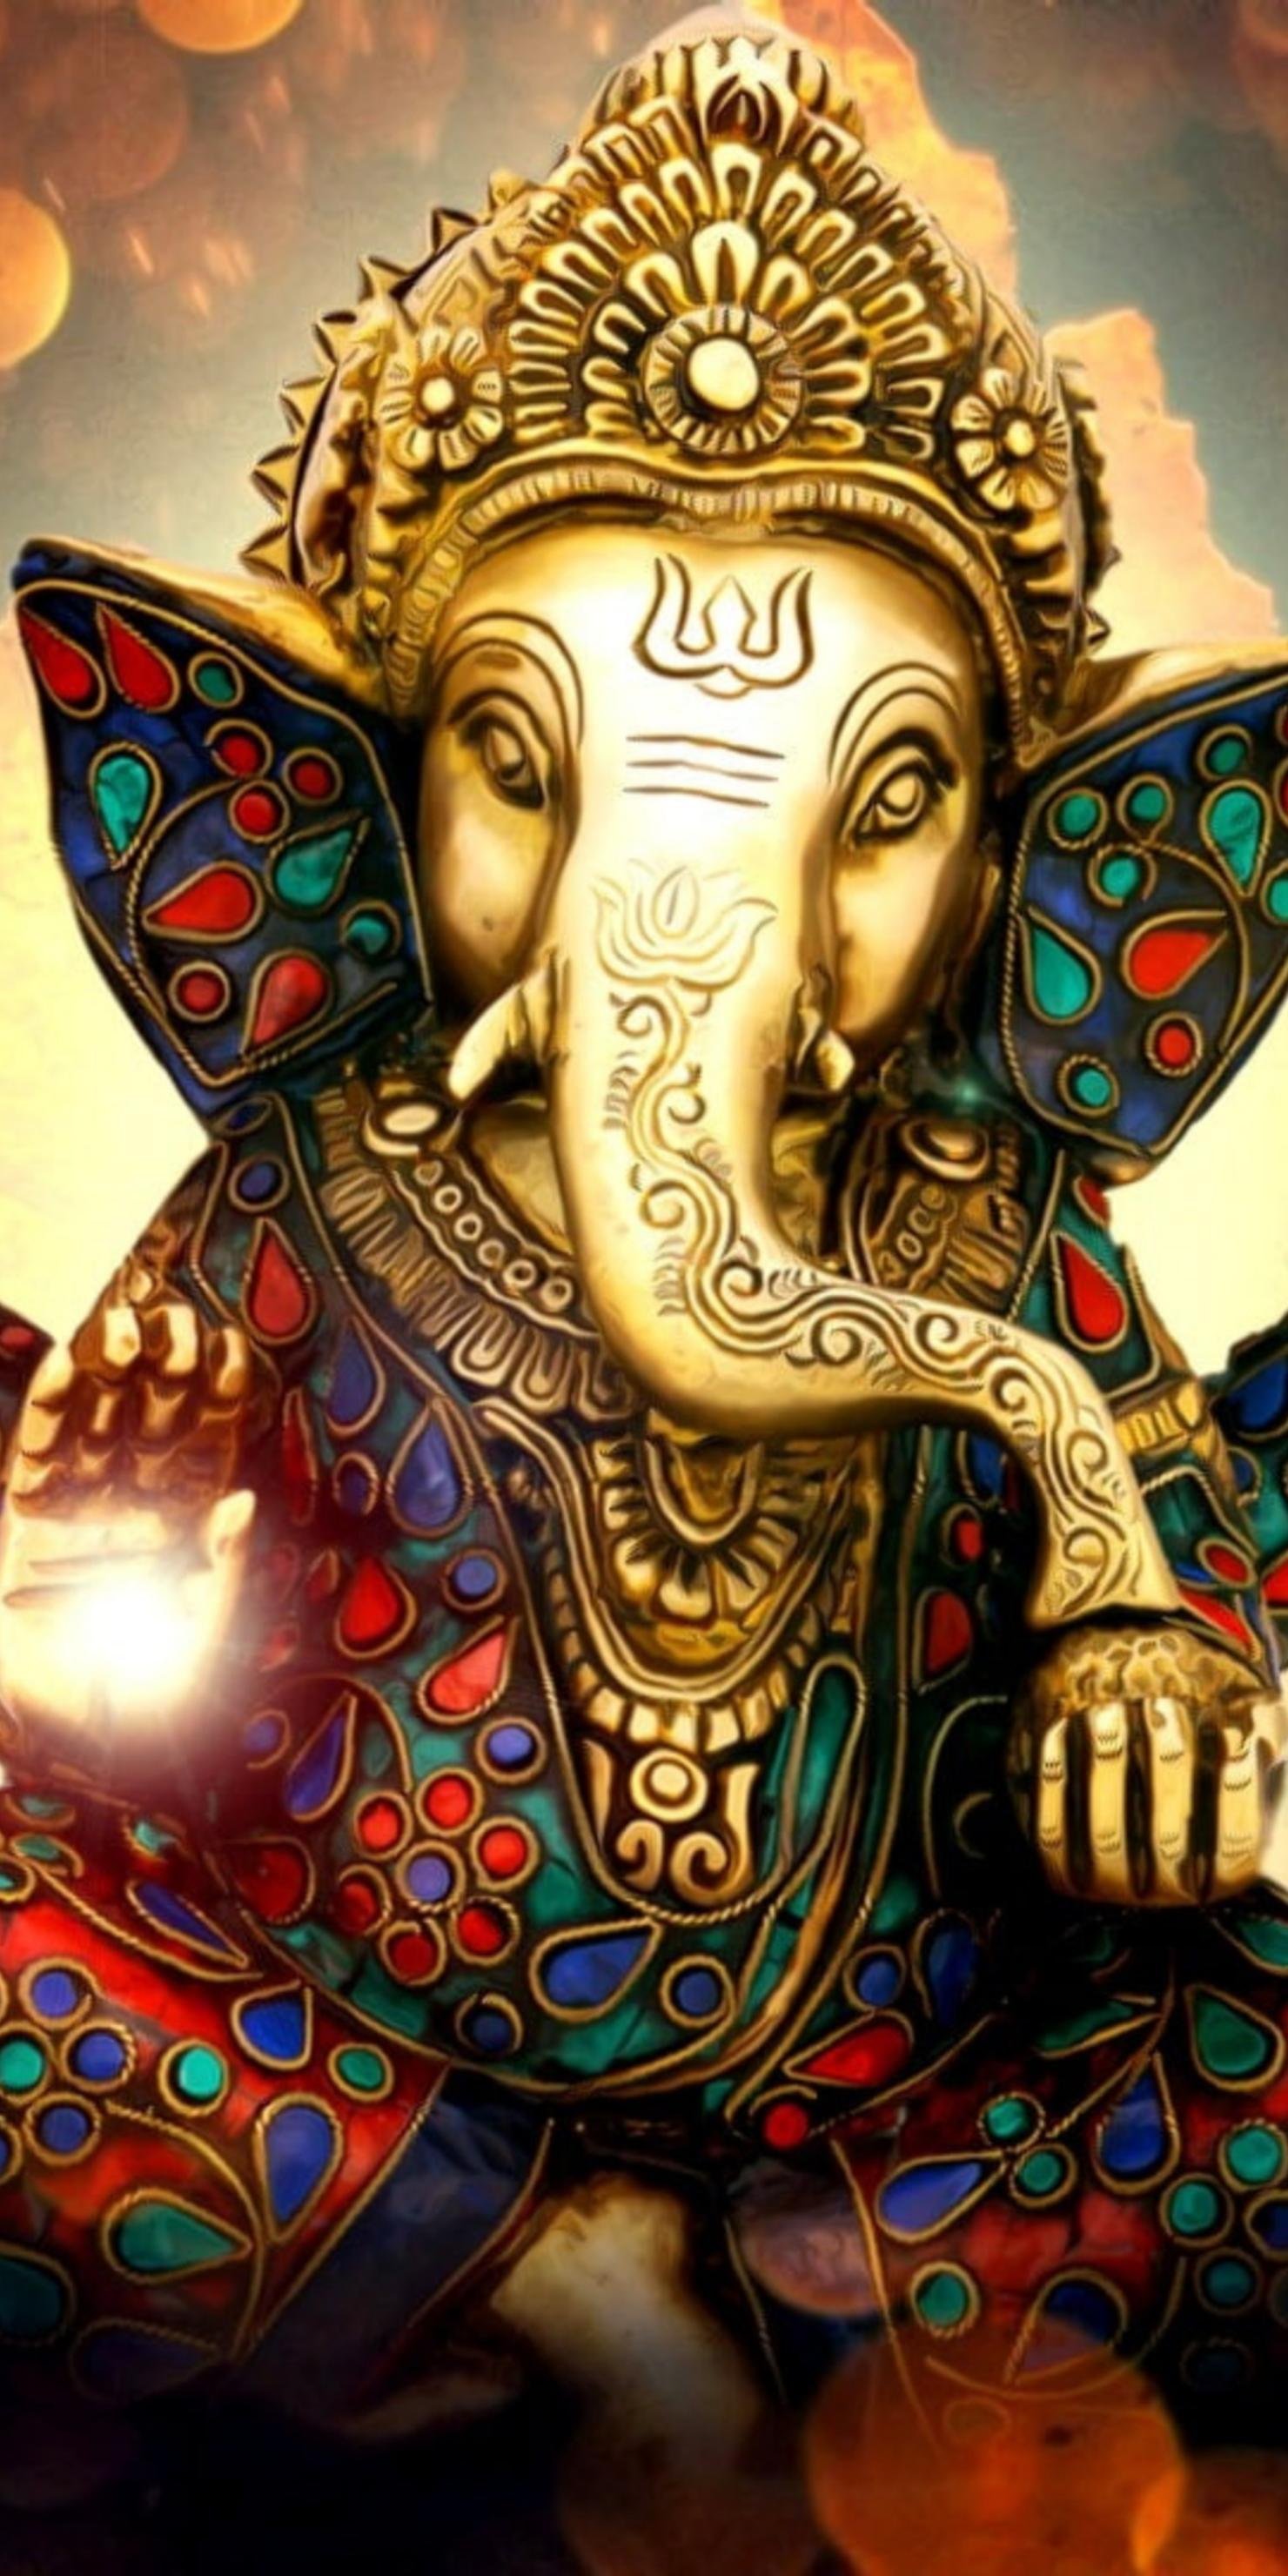 Hindu Lord Ganesha Texture Wallpaper Background Stock Photo, Picture and  Royalty Free Image. Image 136400737.